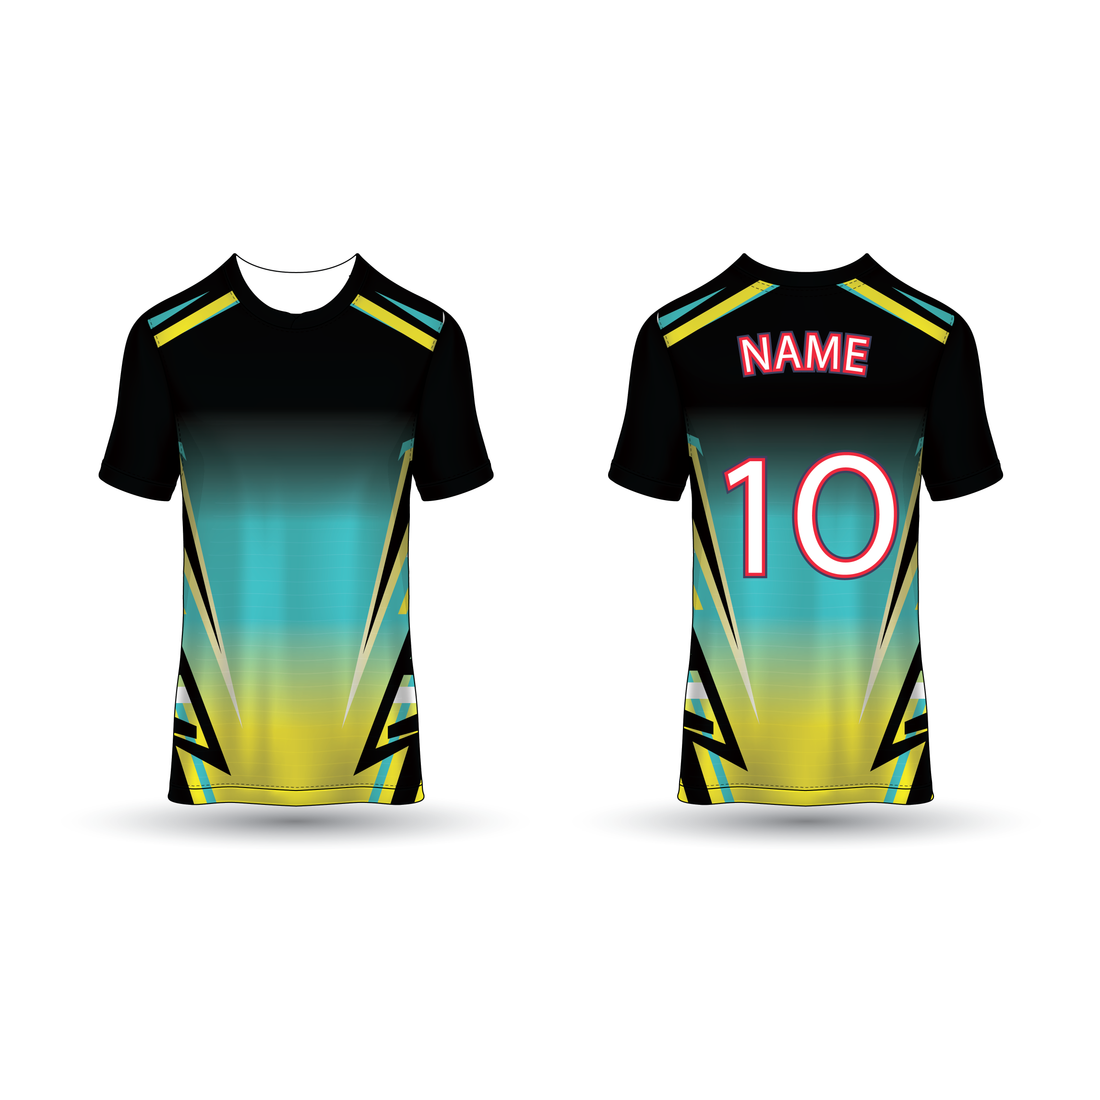 NEXT PRINT All Over Printed Customized Sublimation T-Shirt Unisex Sports Jersey Player Name & Number, Team Name NP50000222